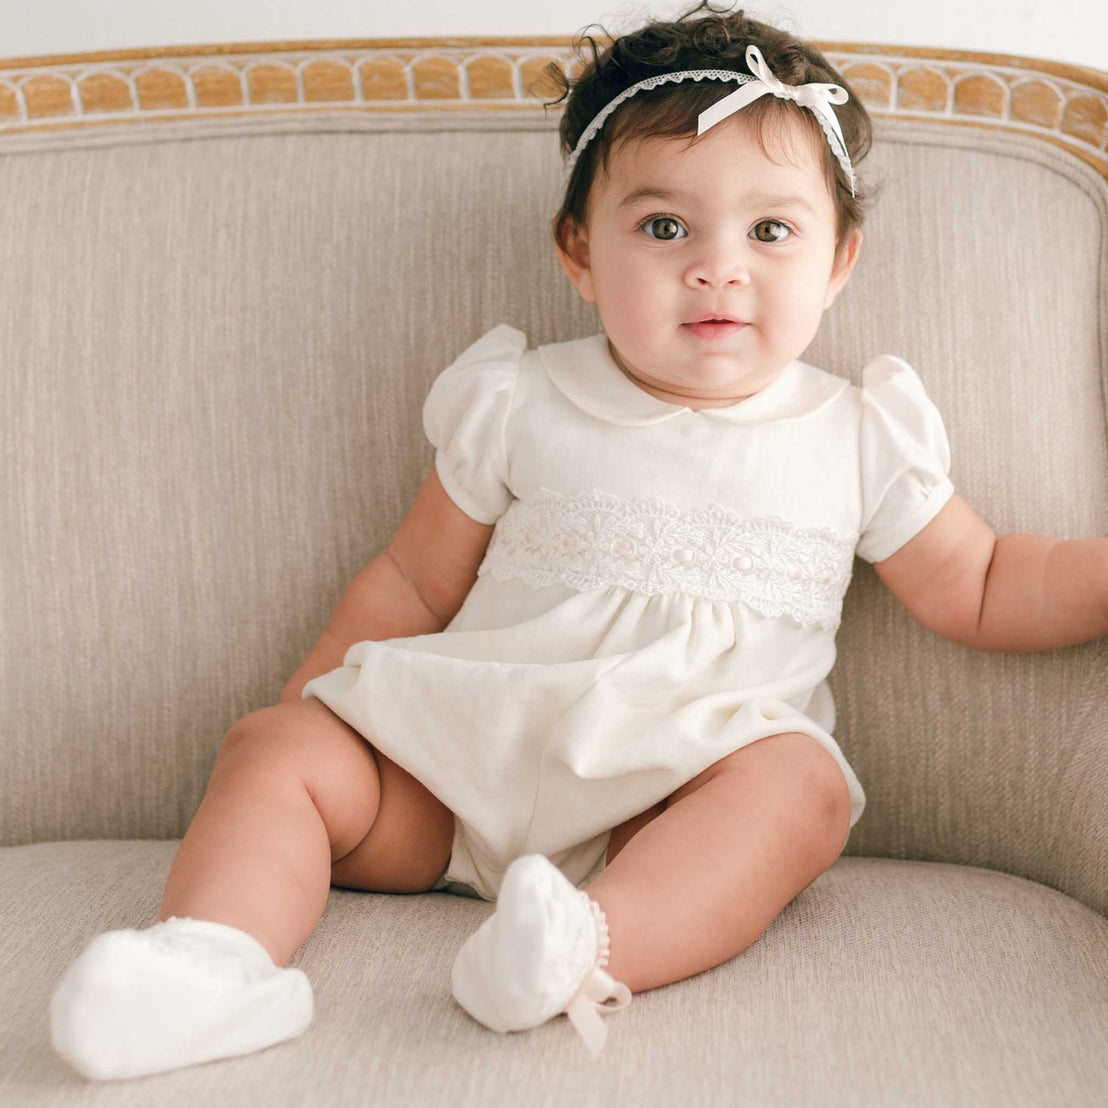 A newborn baby girl with big eyes sits on a beige sofa, wearing an Emma Bubble Romper with lace details and white socks. She has a white headband with a bow.